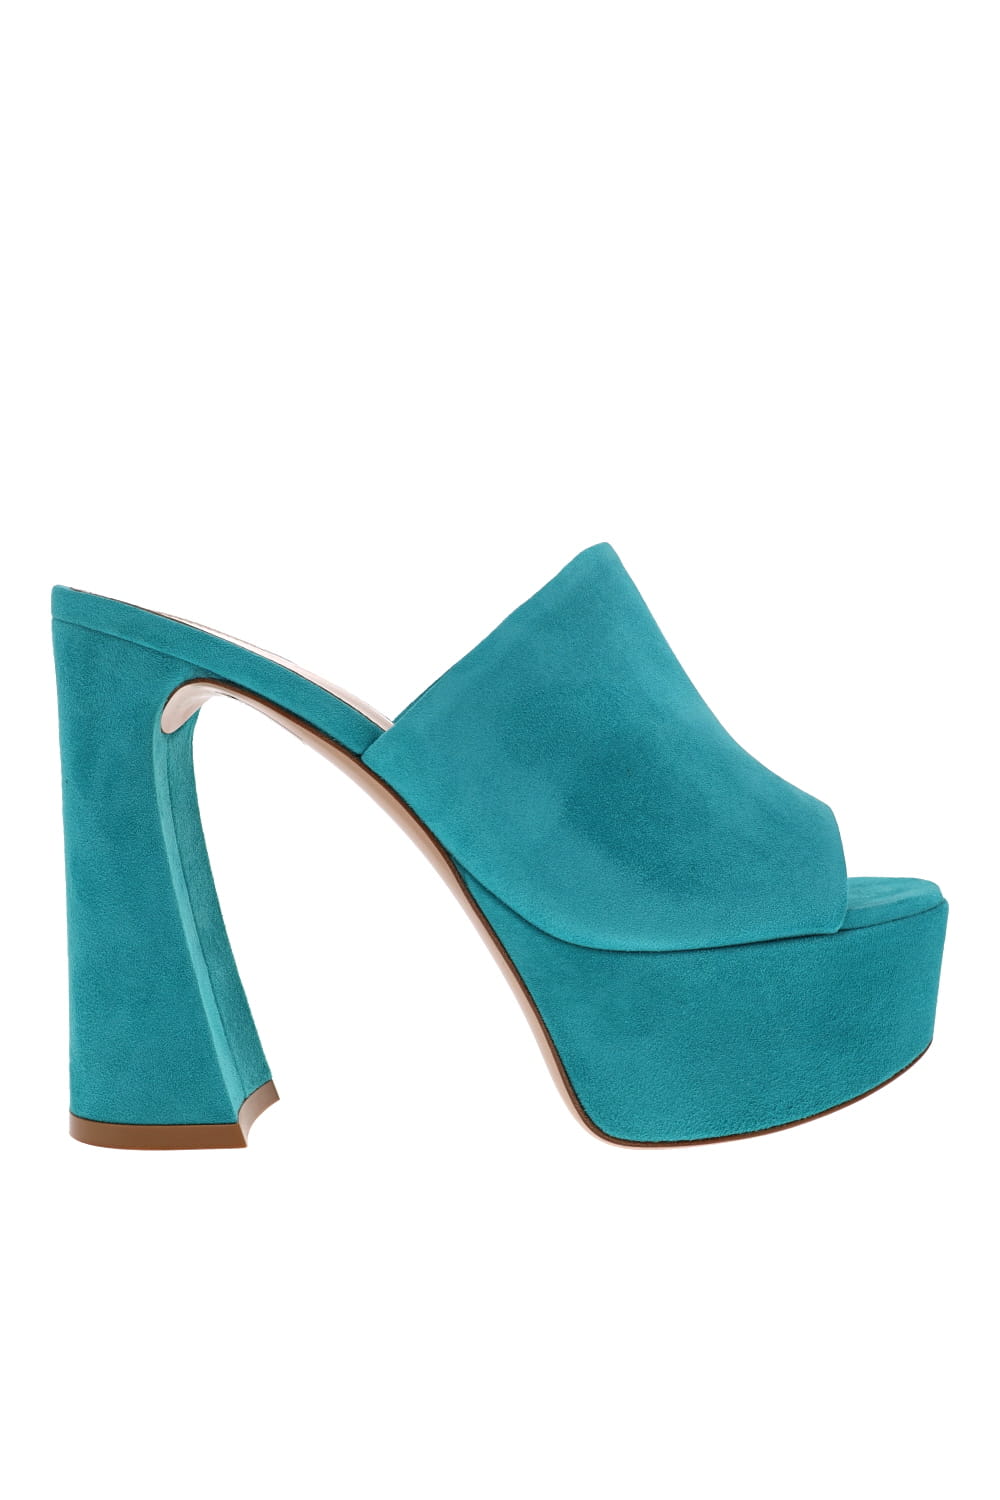 Gianvito Rossi Holly Hydra Suede Platform Mules